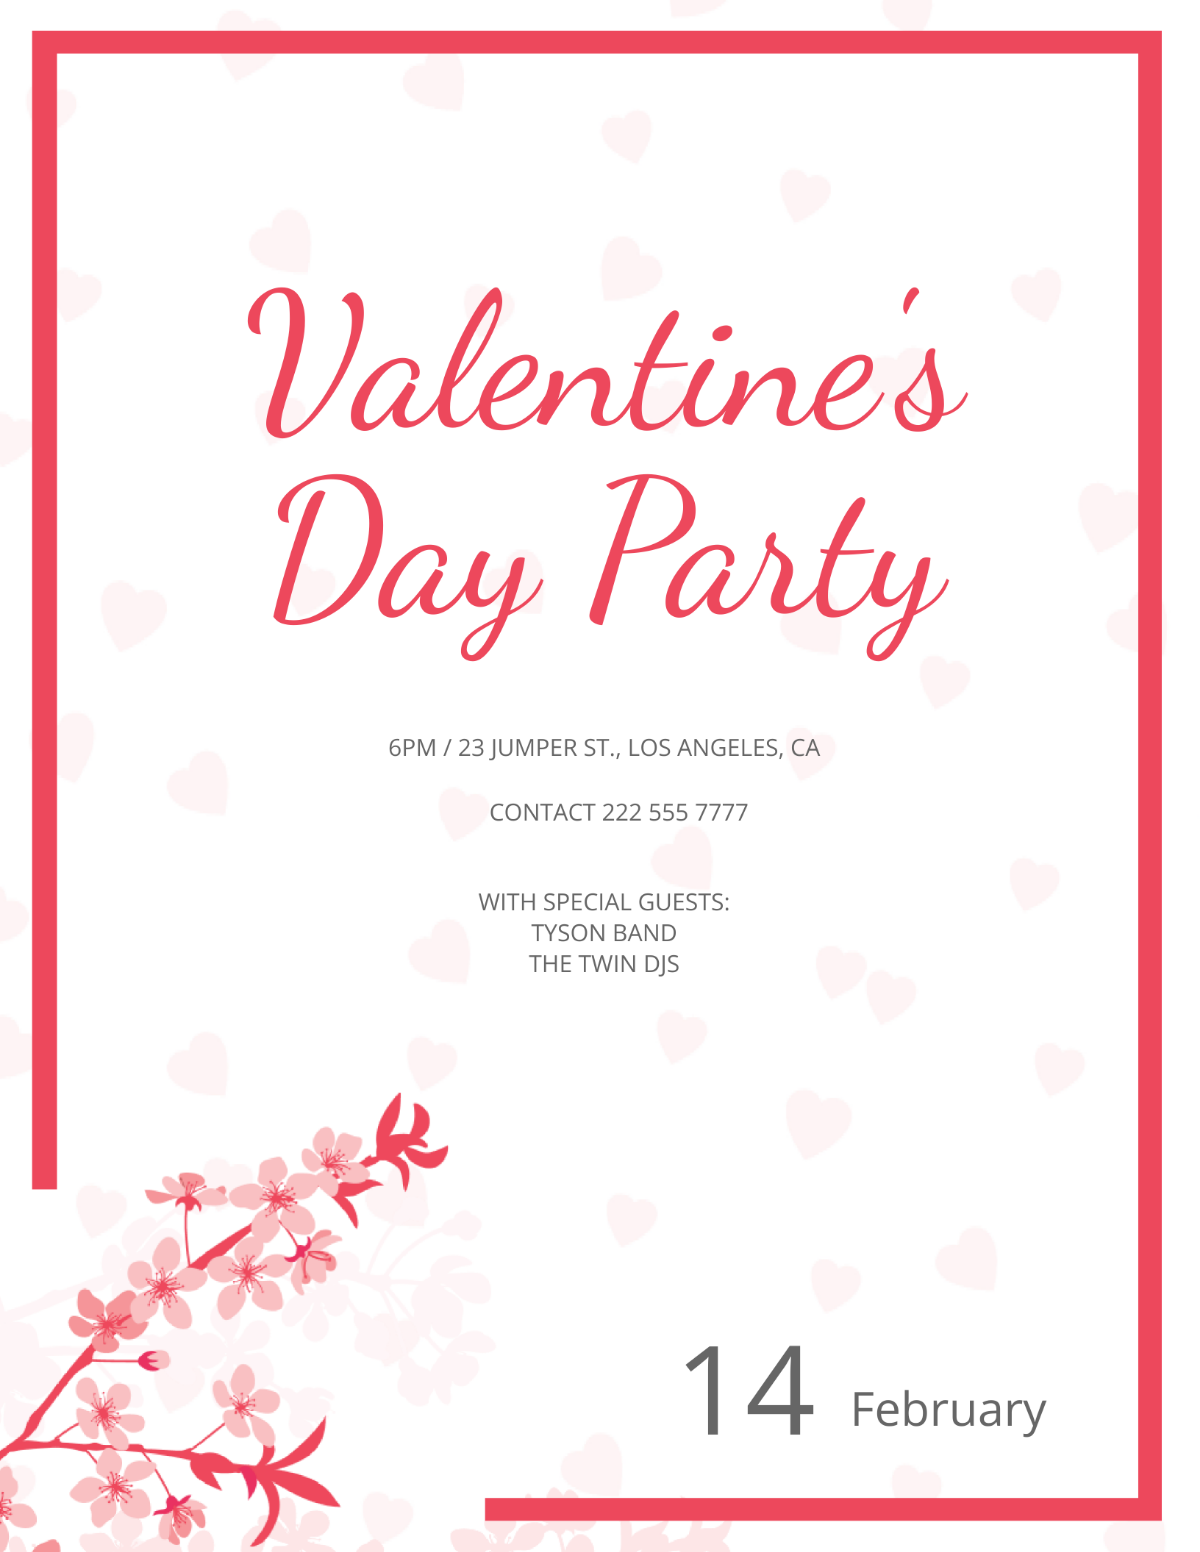 Free Valentine's Day Flyer Template